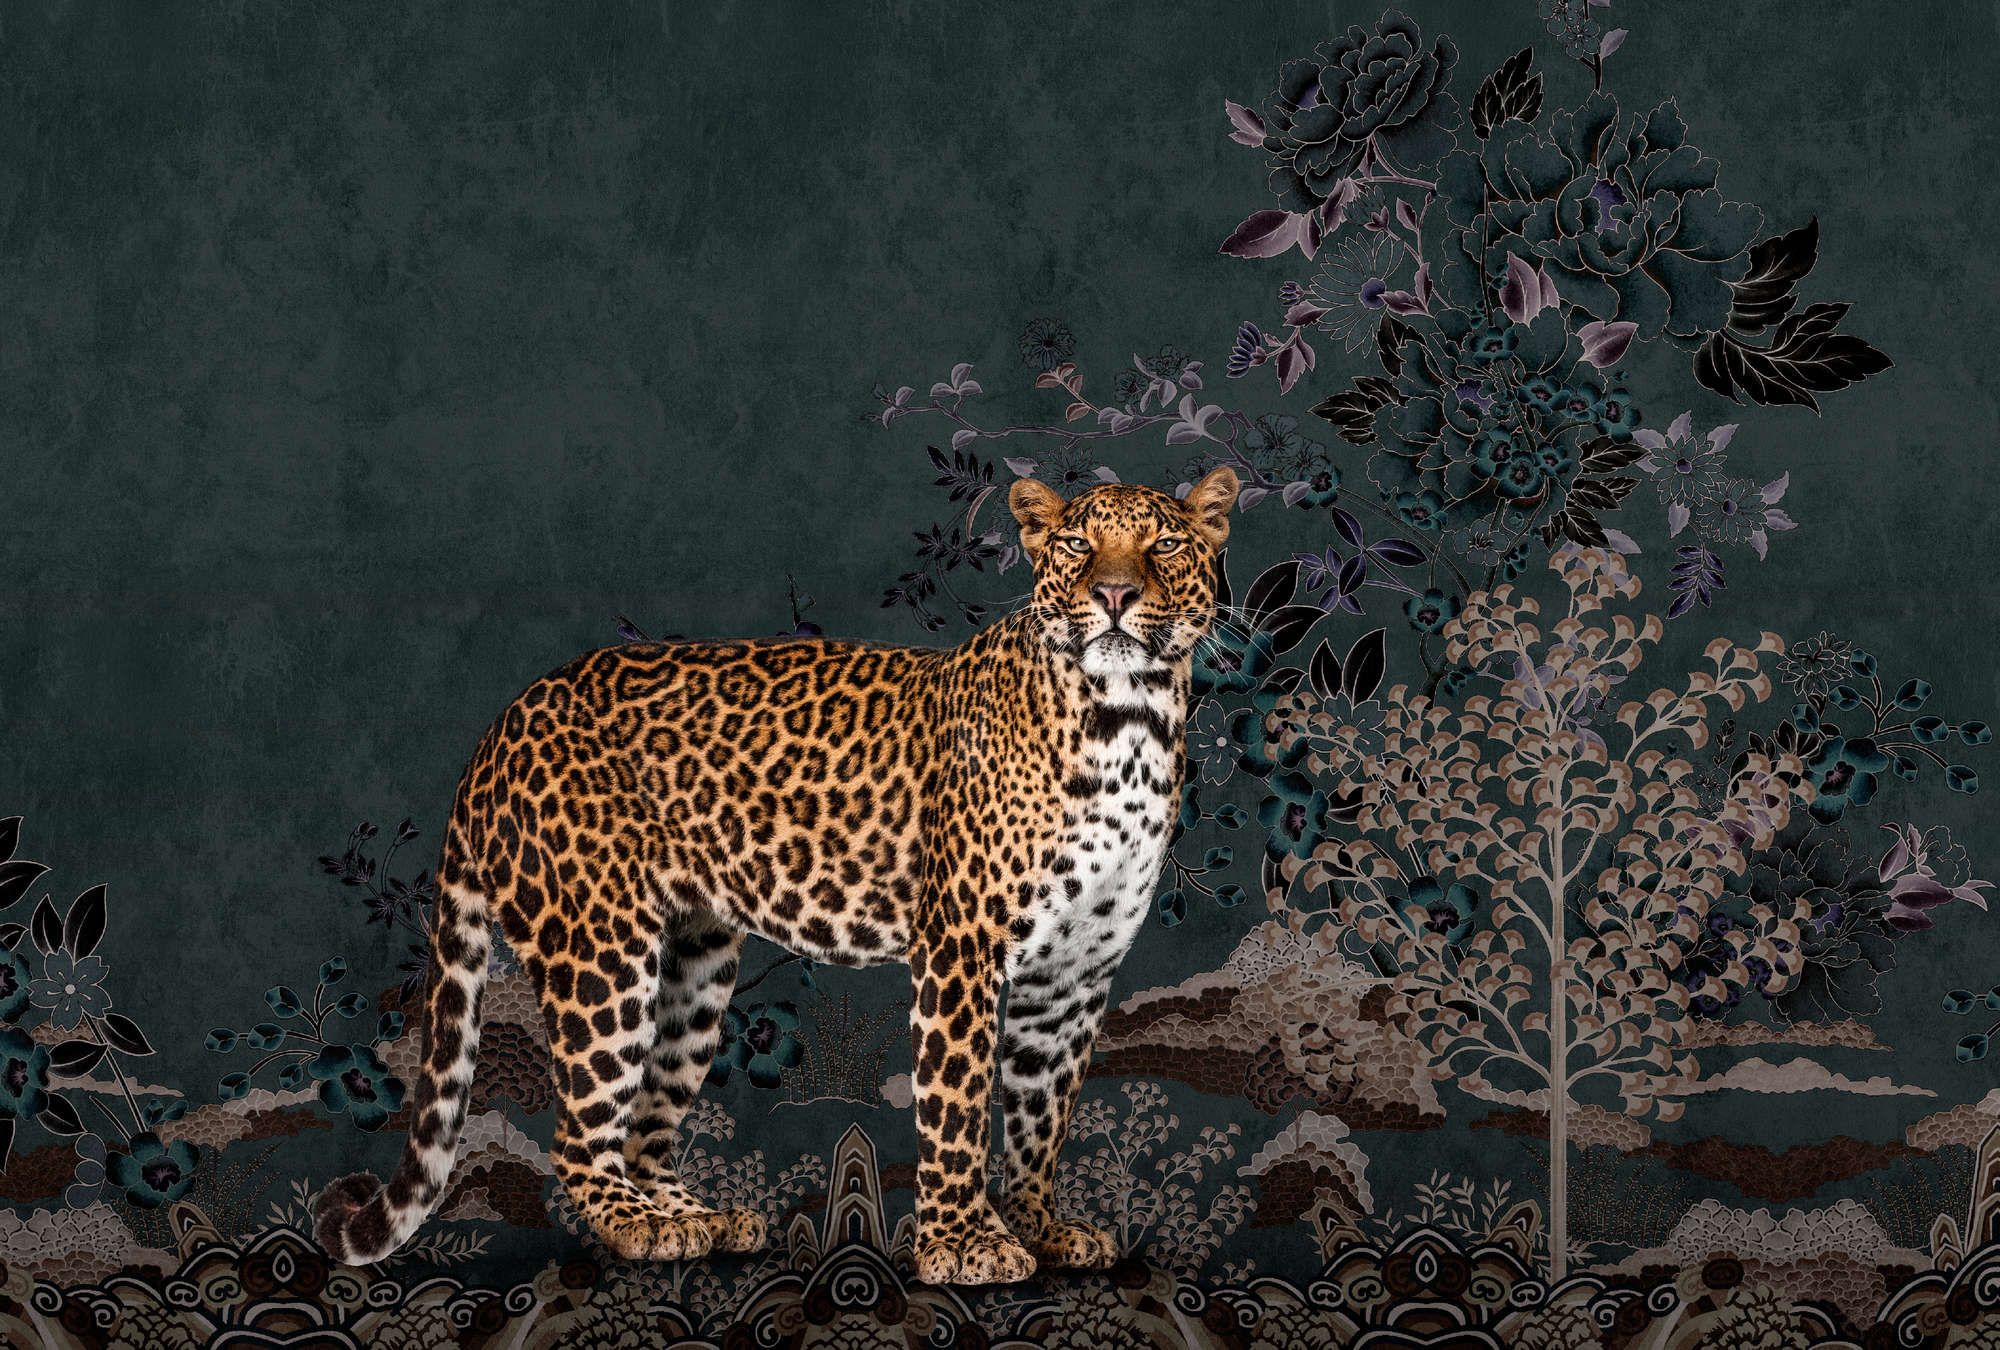             Photo wallpaper »rani« - Abstract jungle motif with leopard - Lightly textured non-woven fabric
        